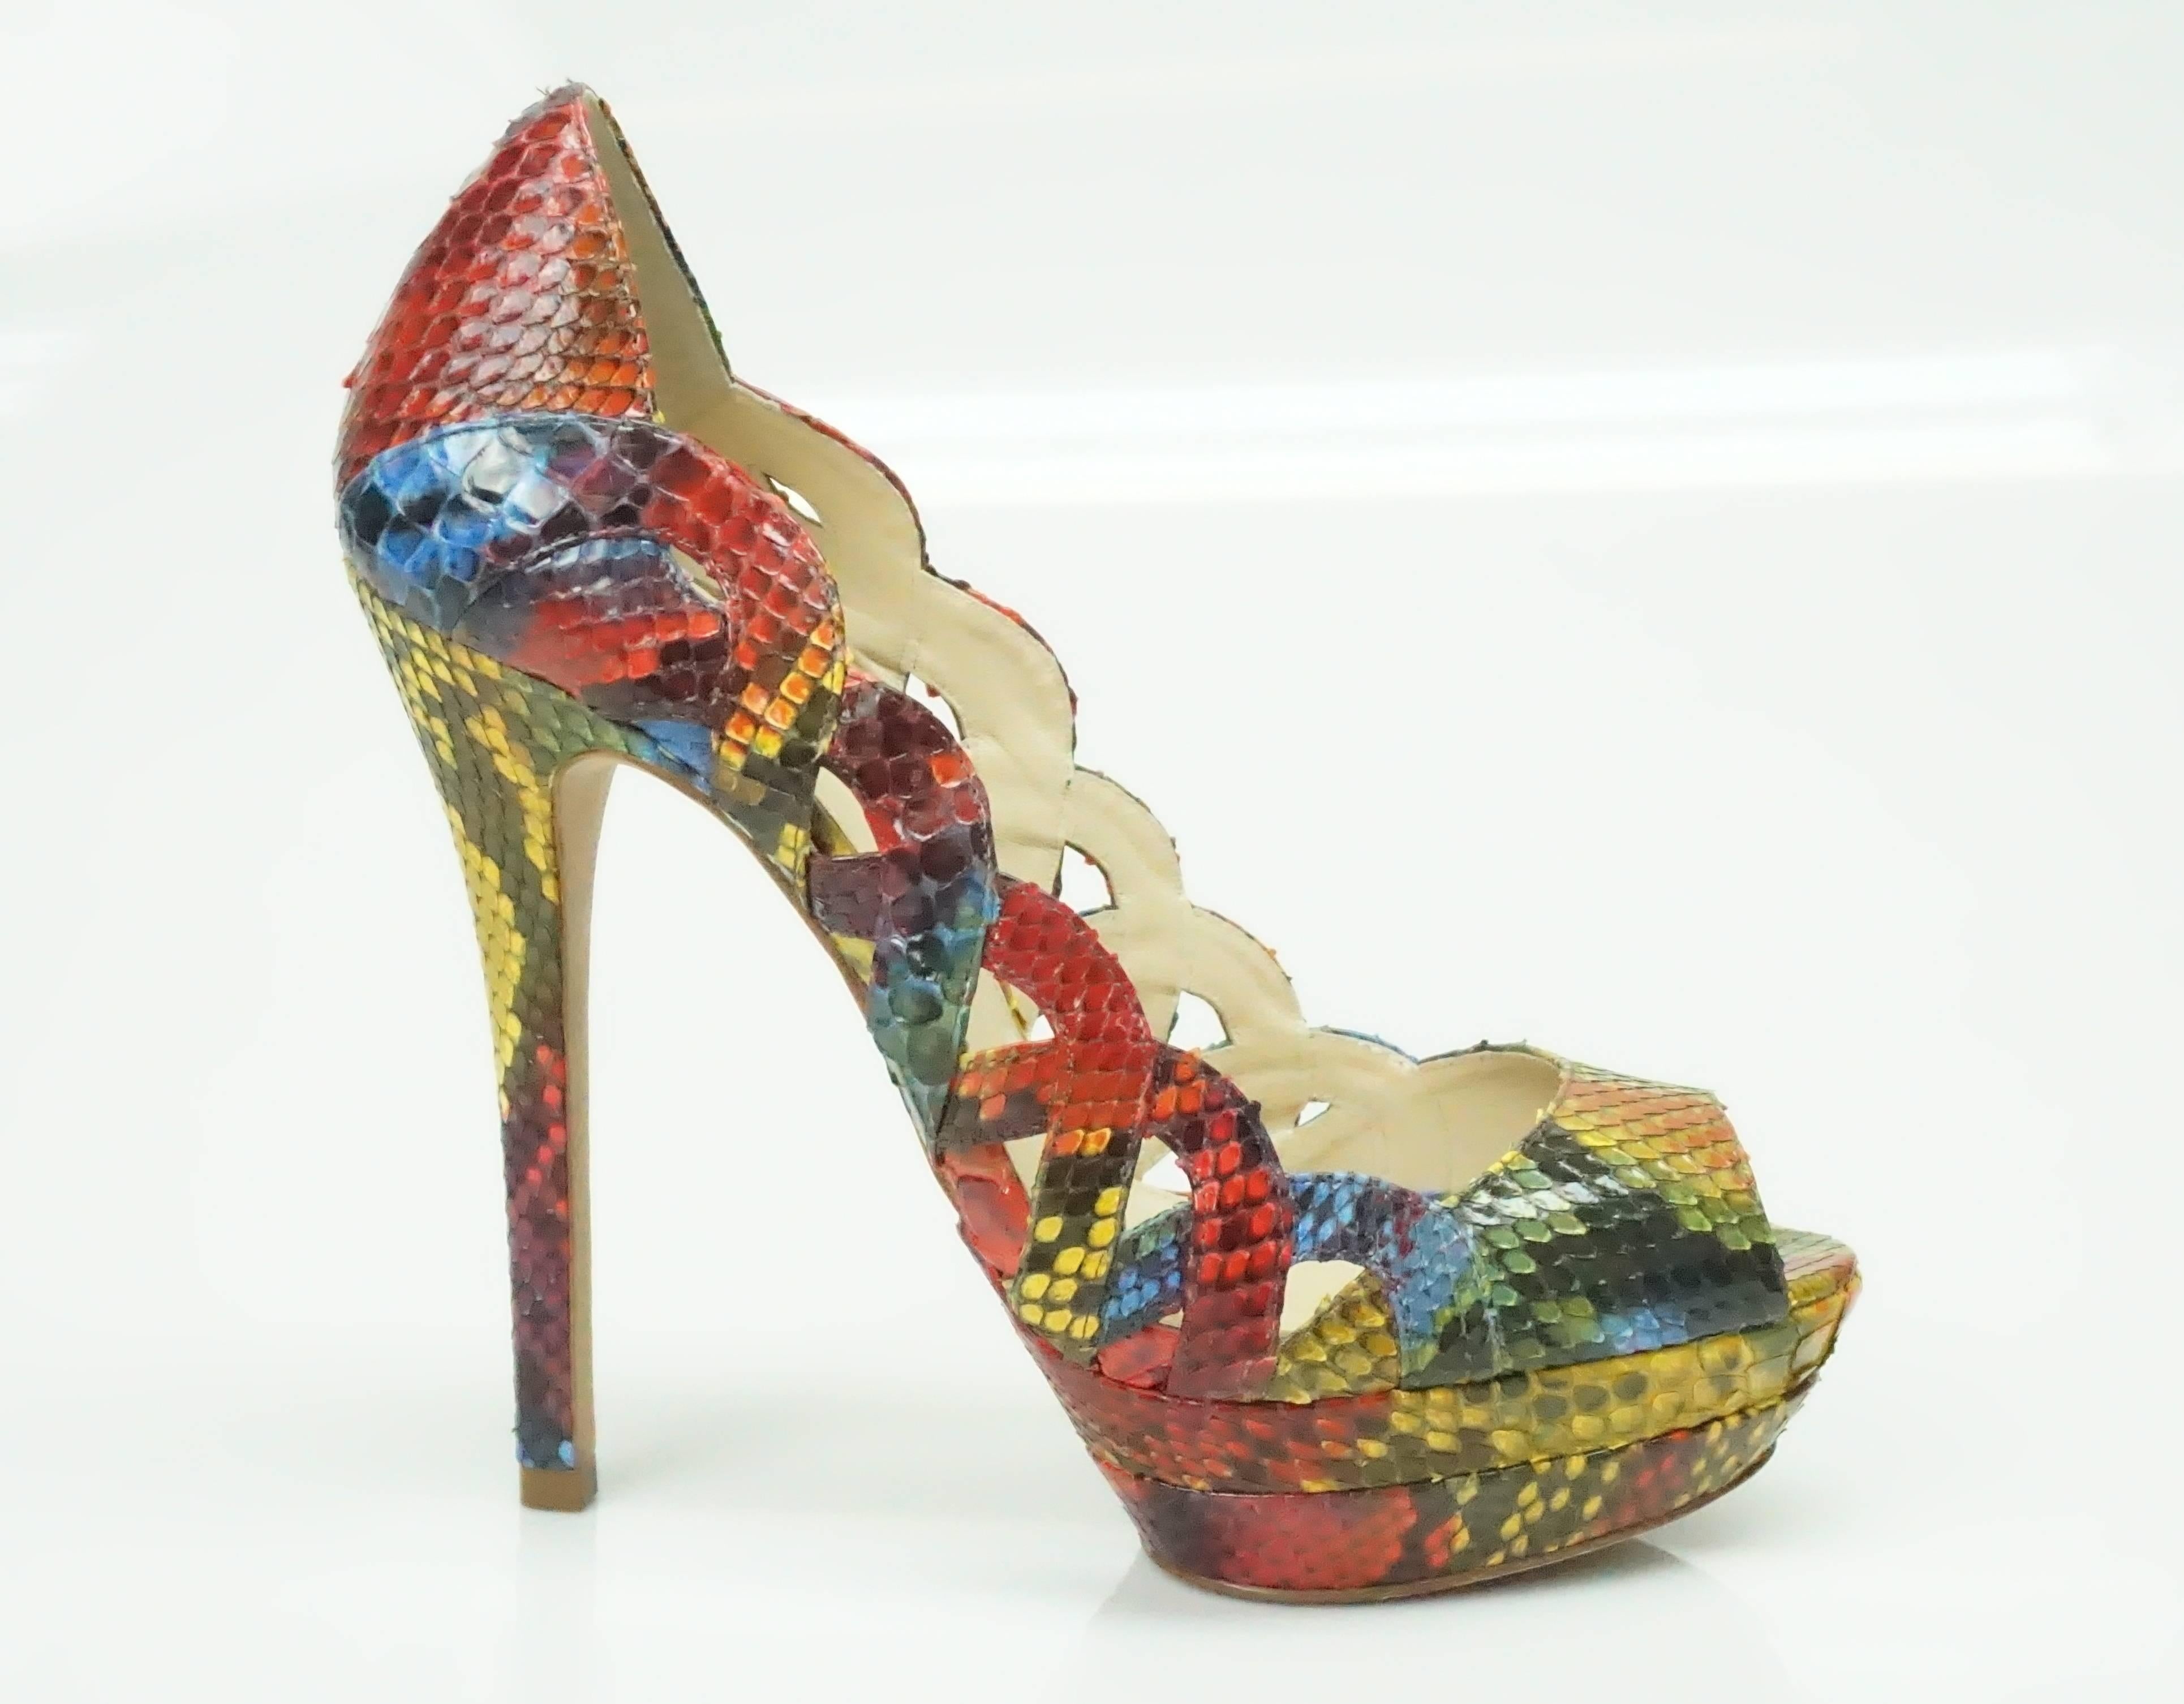 Alexandre Birman Multi Color Python Peeptoe Platform Heel - 8  These truly spectacular heels are a must have for any fashionista. They have scalloped cutout details on the sides, are peeptoe and have a very high almost spike heel. The colors on the